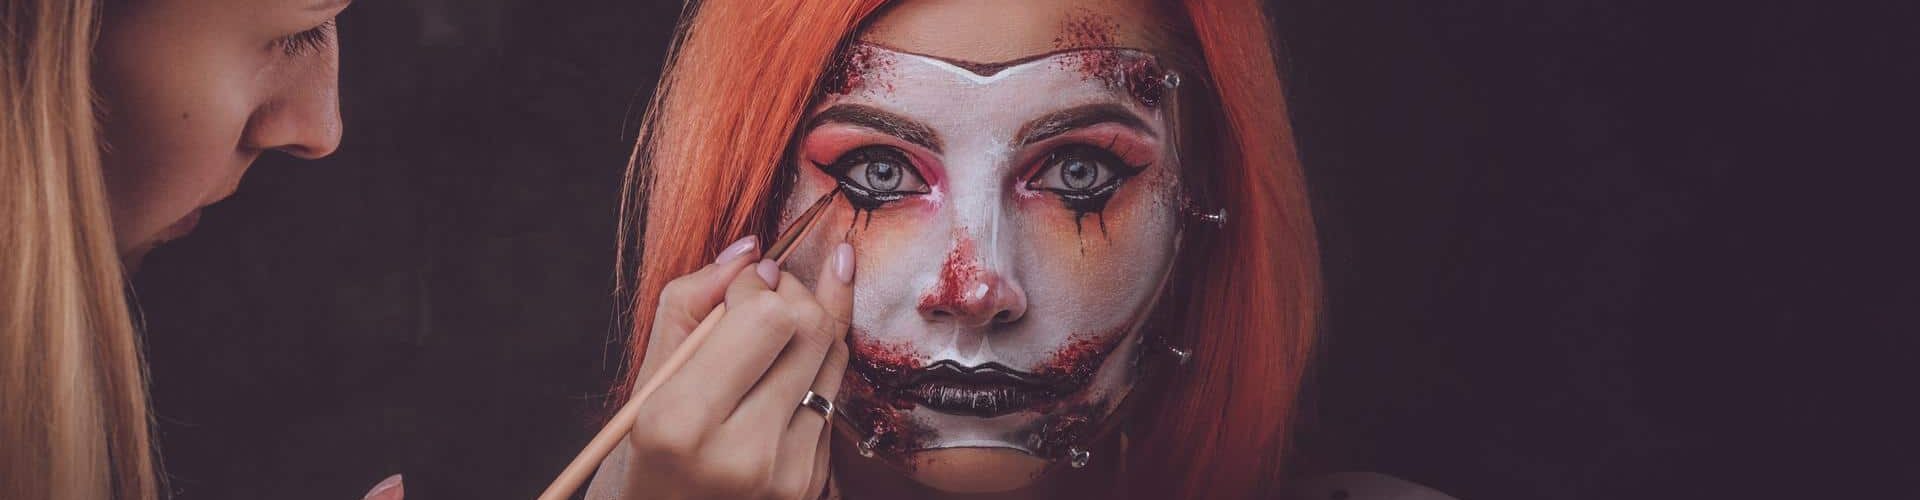 Conseils maquillages pour Halloween